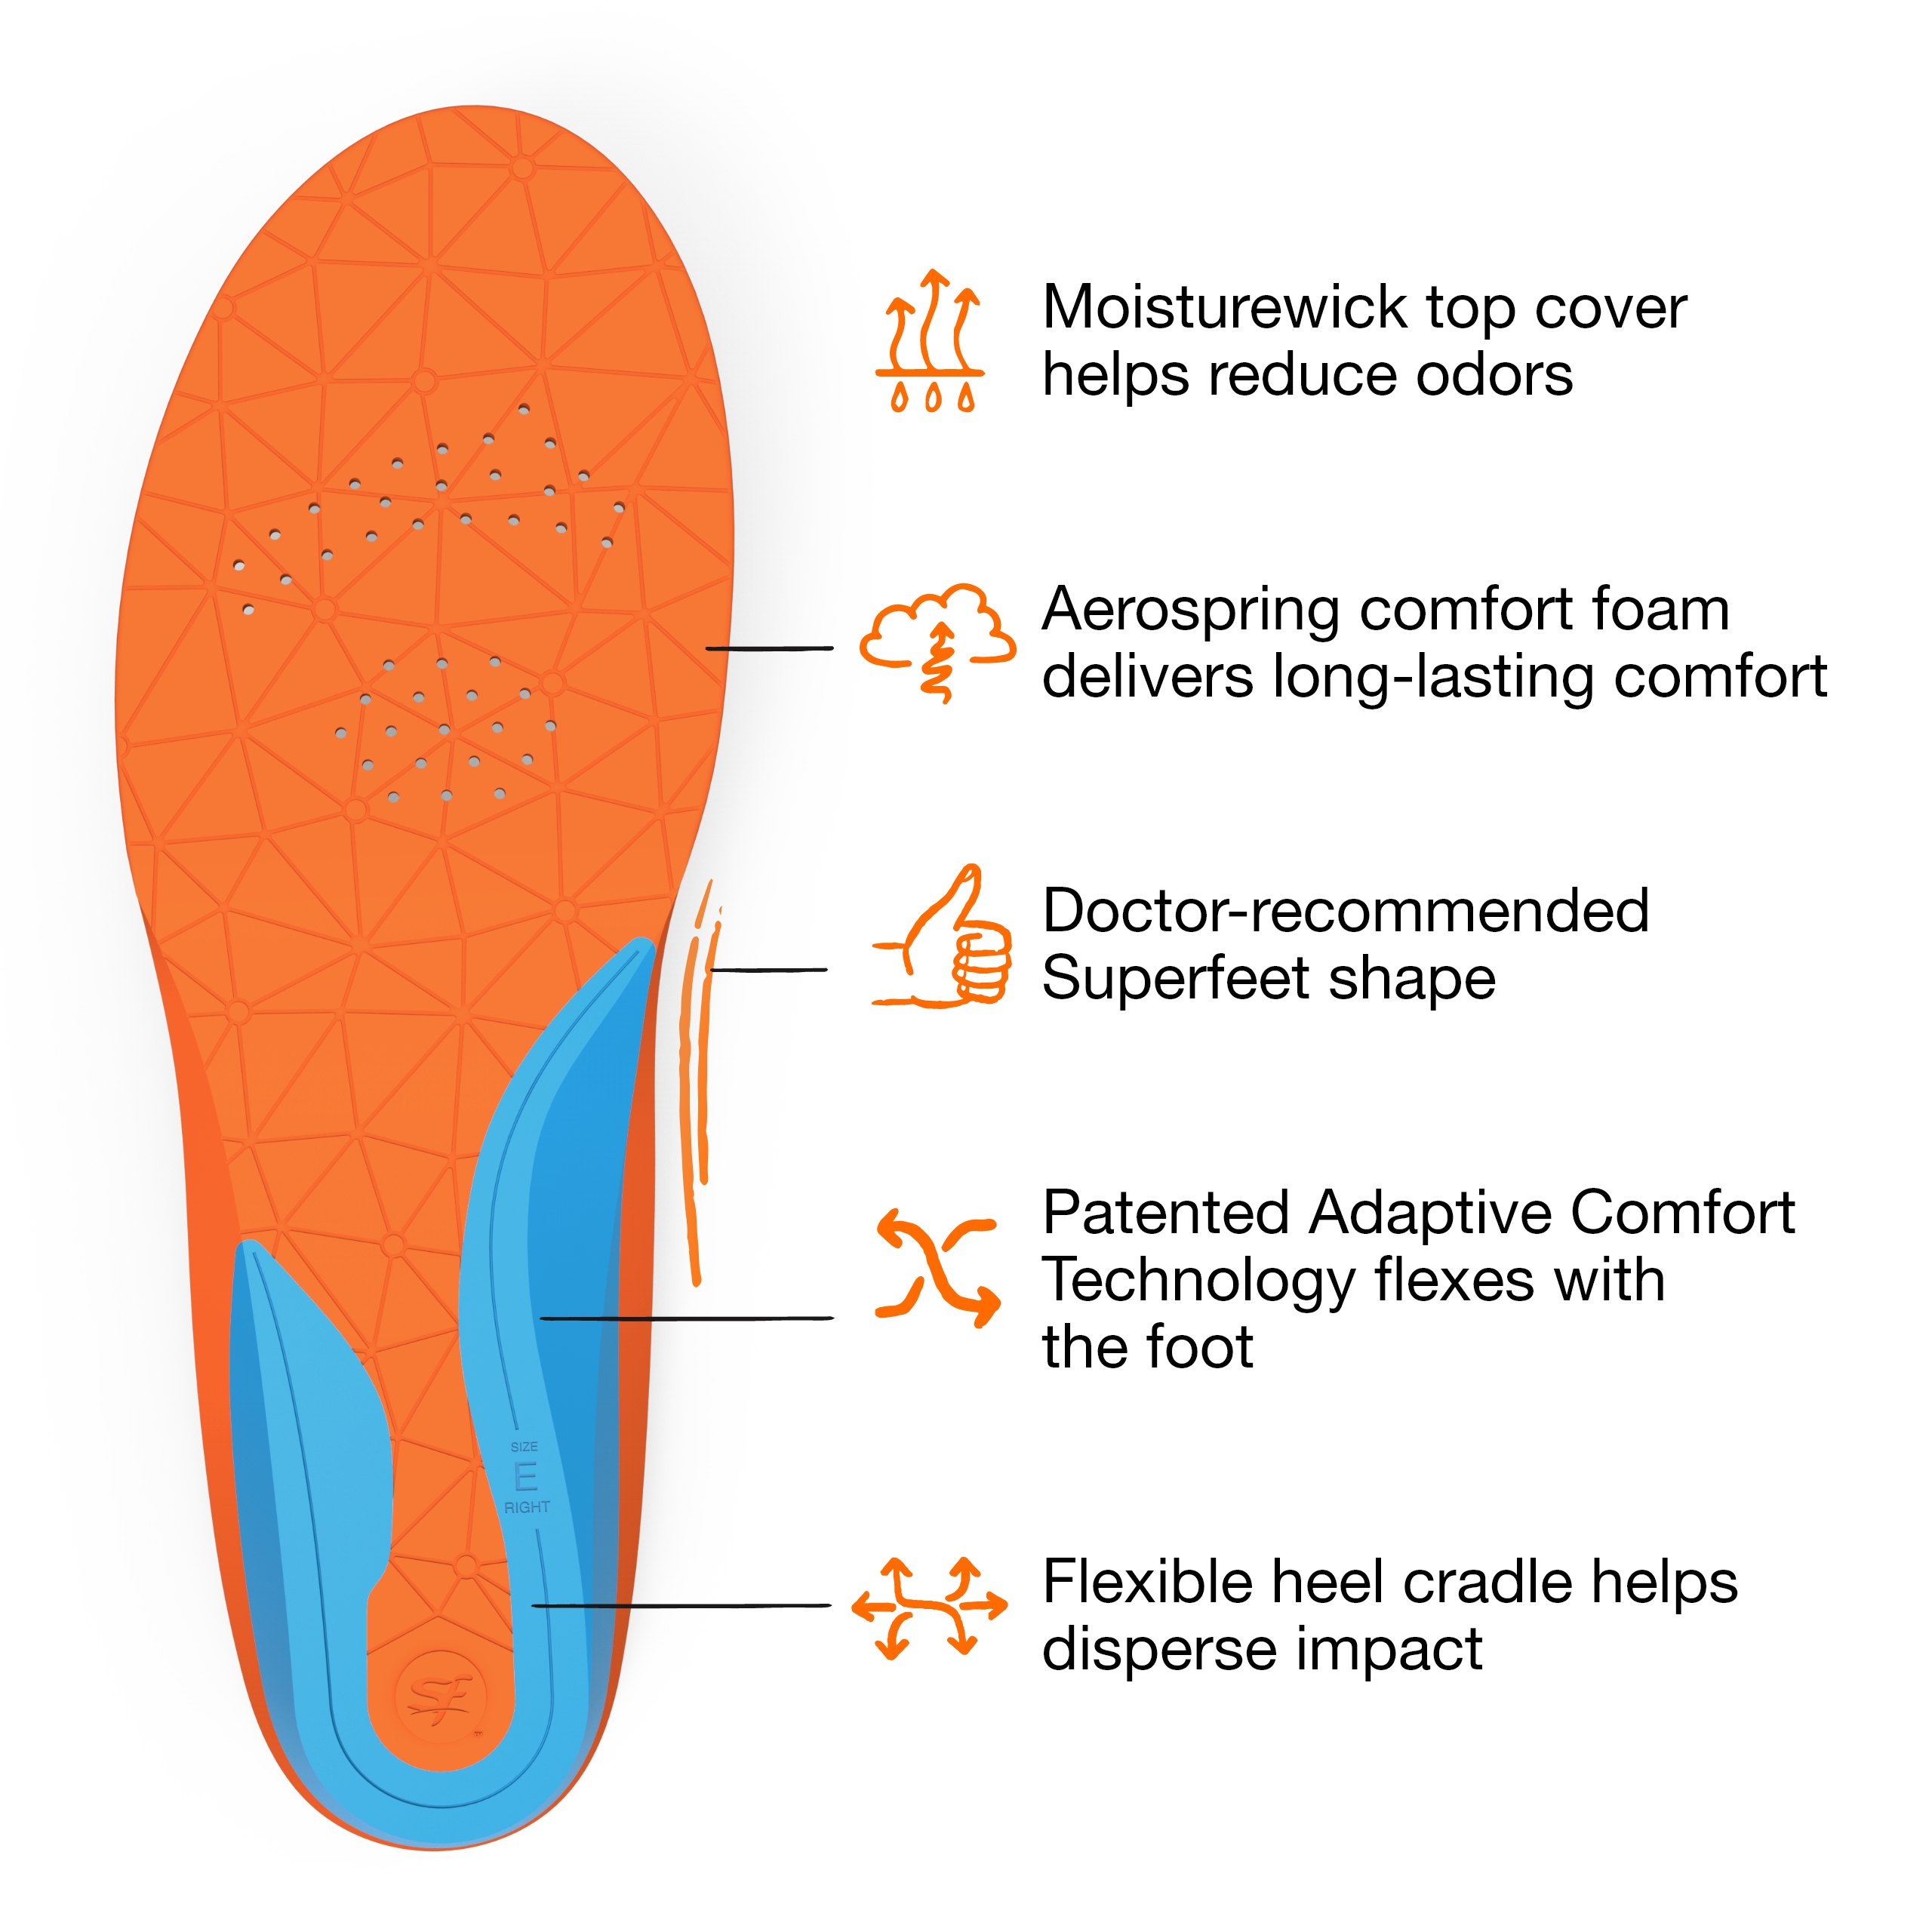 Superfeet All-Purpose Cushion Insoles - Trim-To-Fit Medium Arch Support Comfort Foam Inserts for Workout Shoes - Professional Grade - Men 5.5-7 / Women 6.5-8 - image 4 of 6